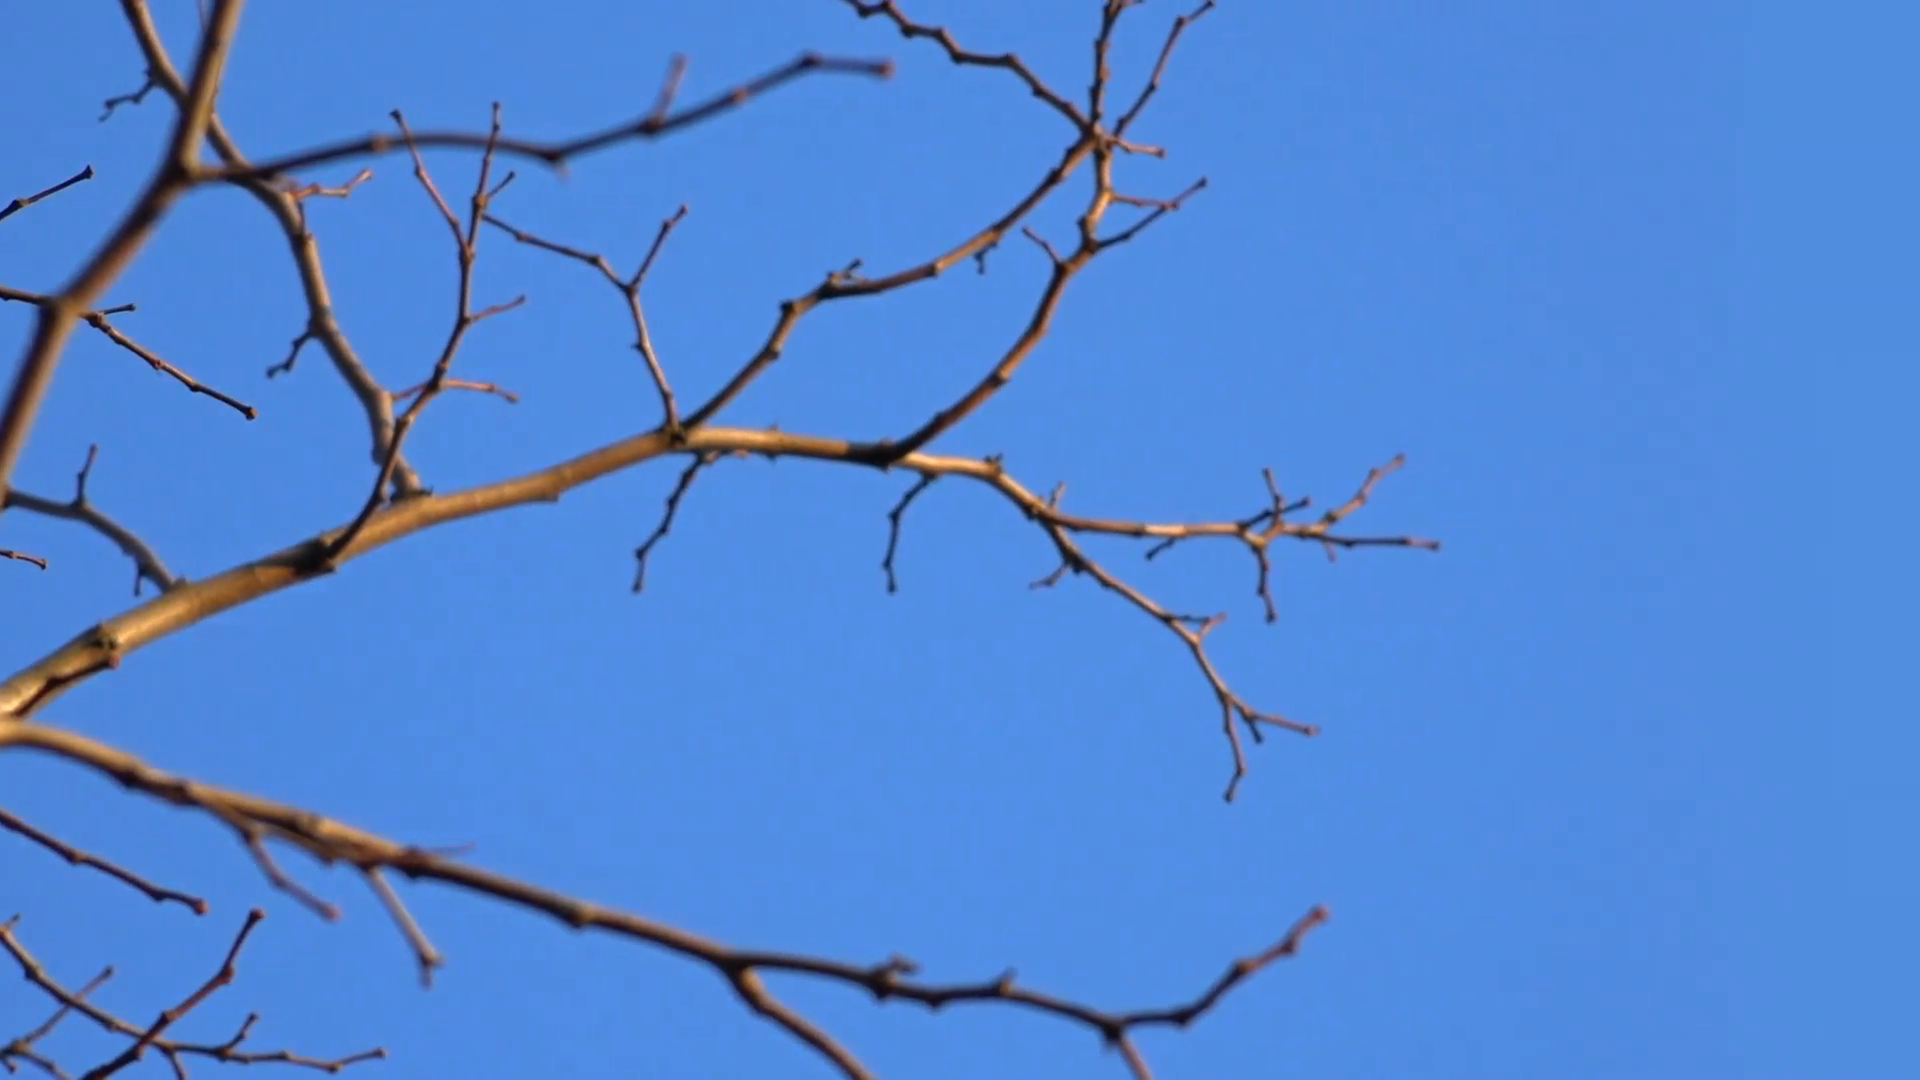 Autunmal nude branches on blue sky - No leaves, no clouds ...